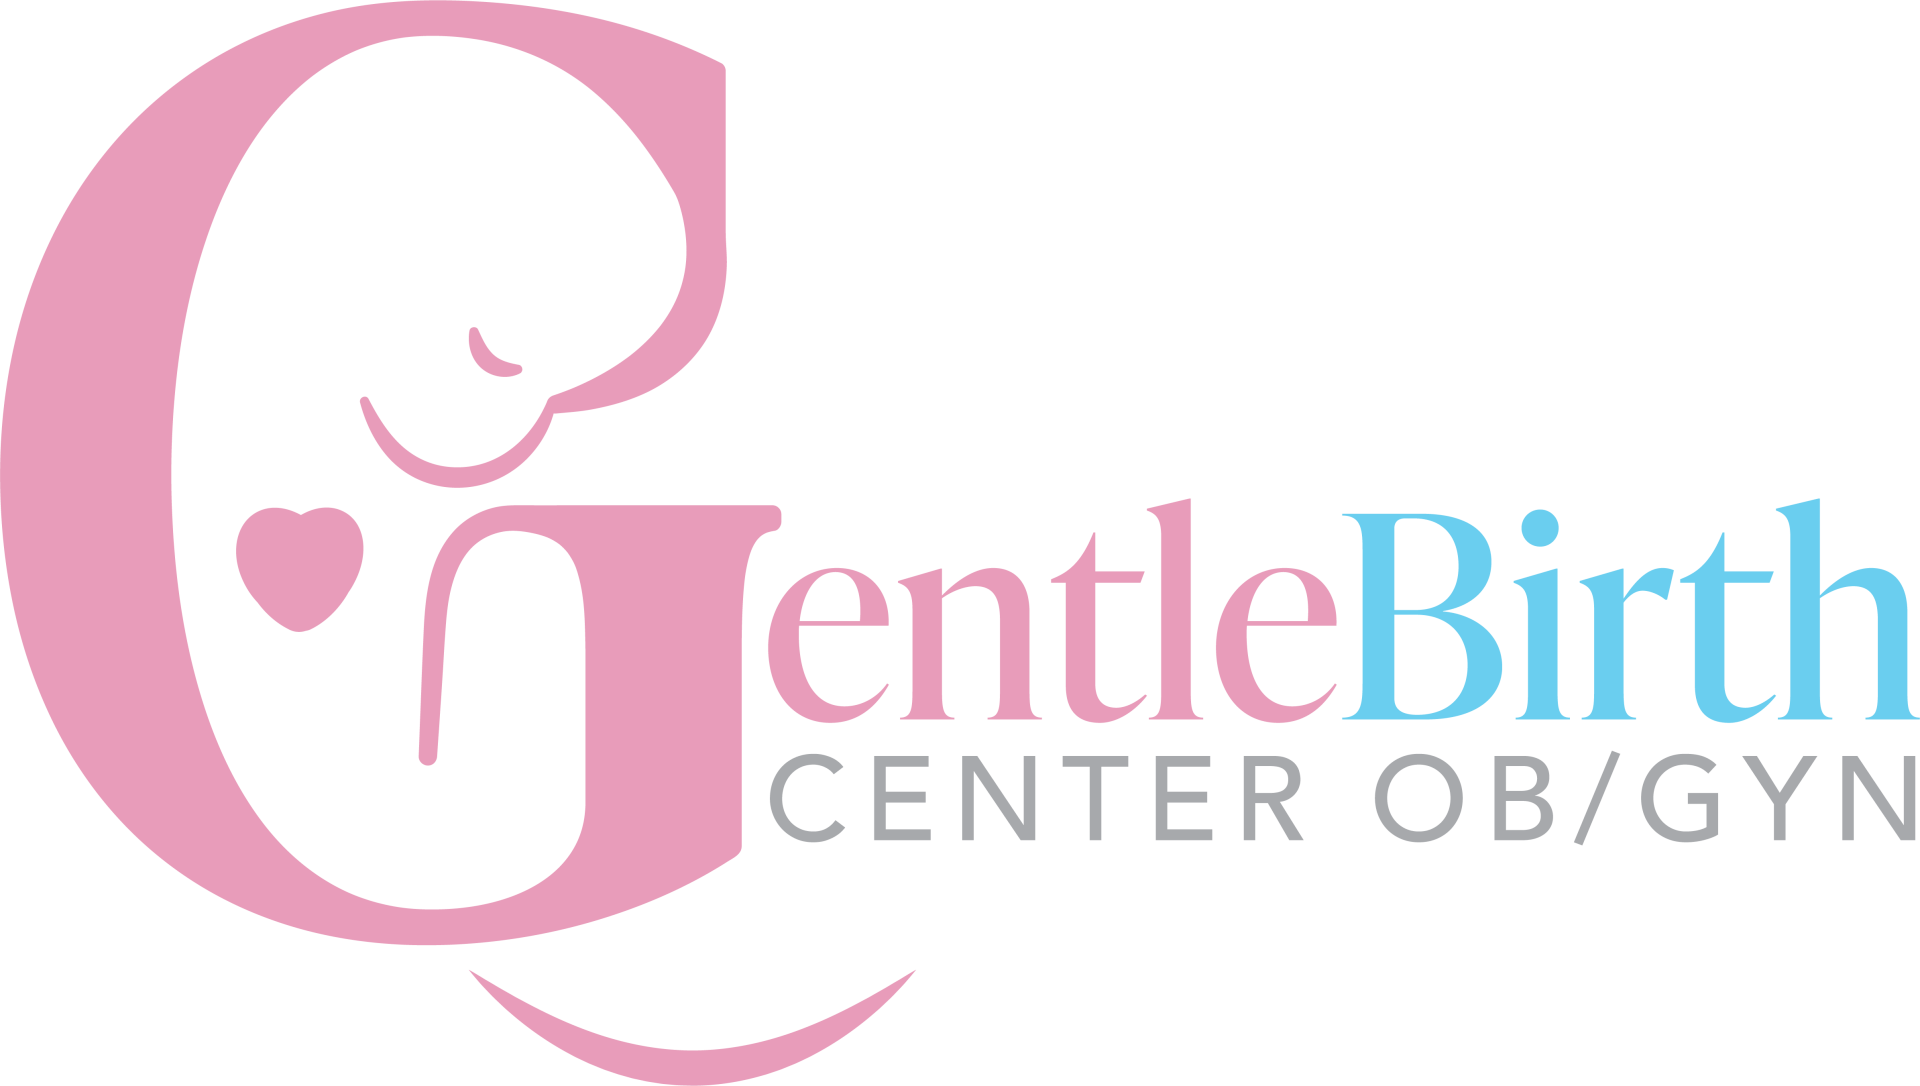 Waterbirth Services & Centers Near Me